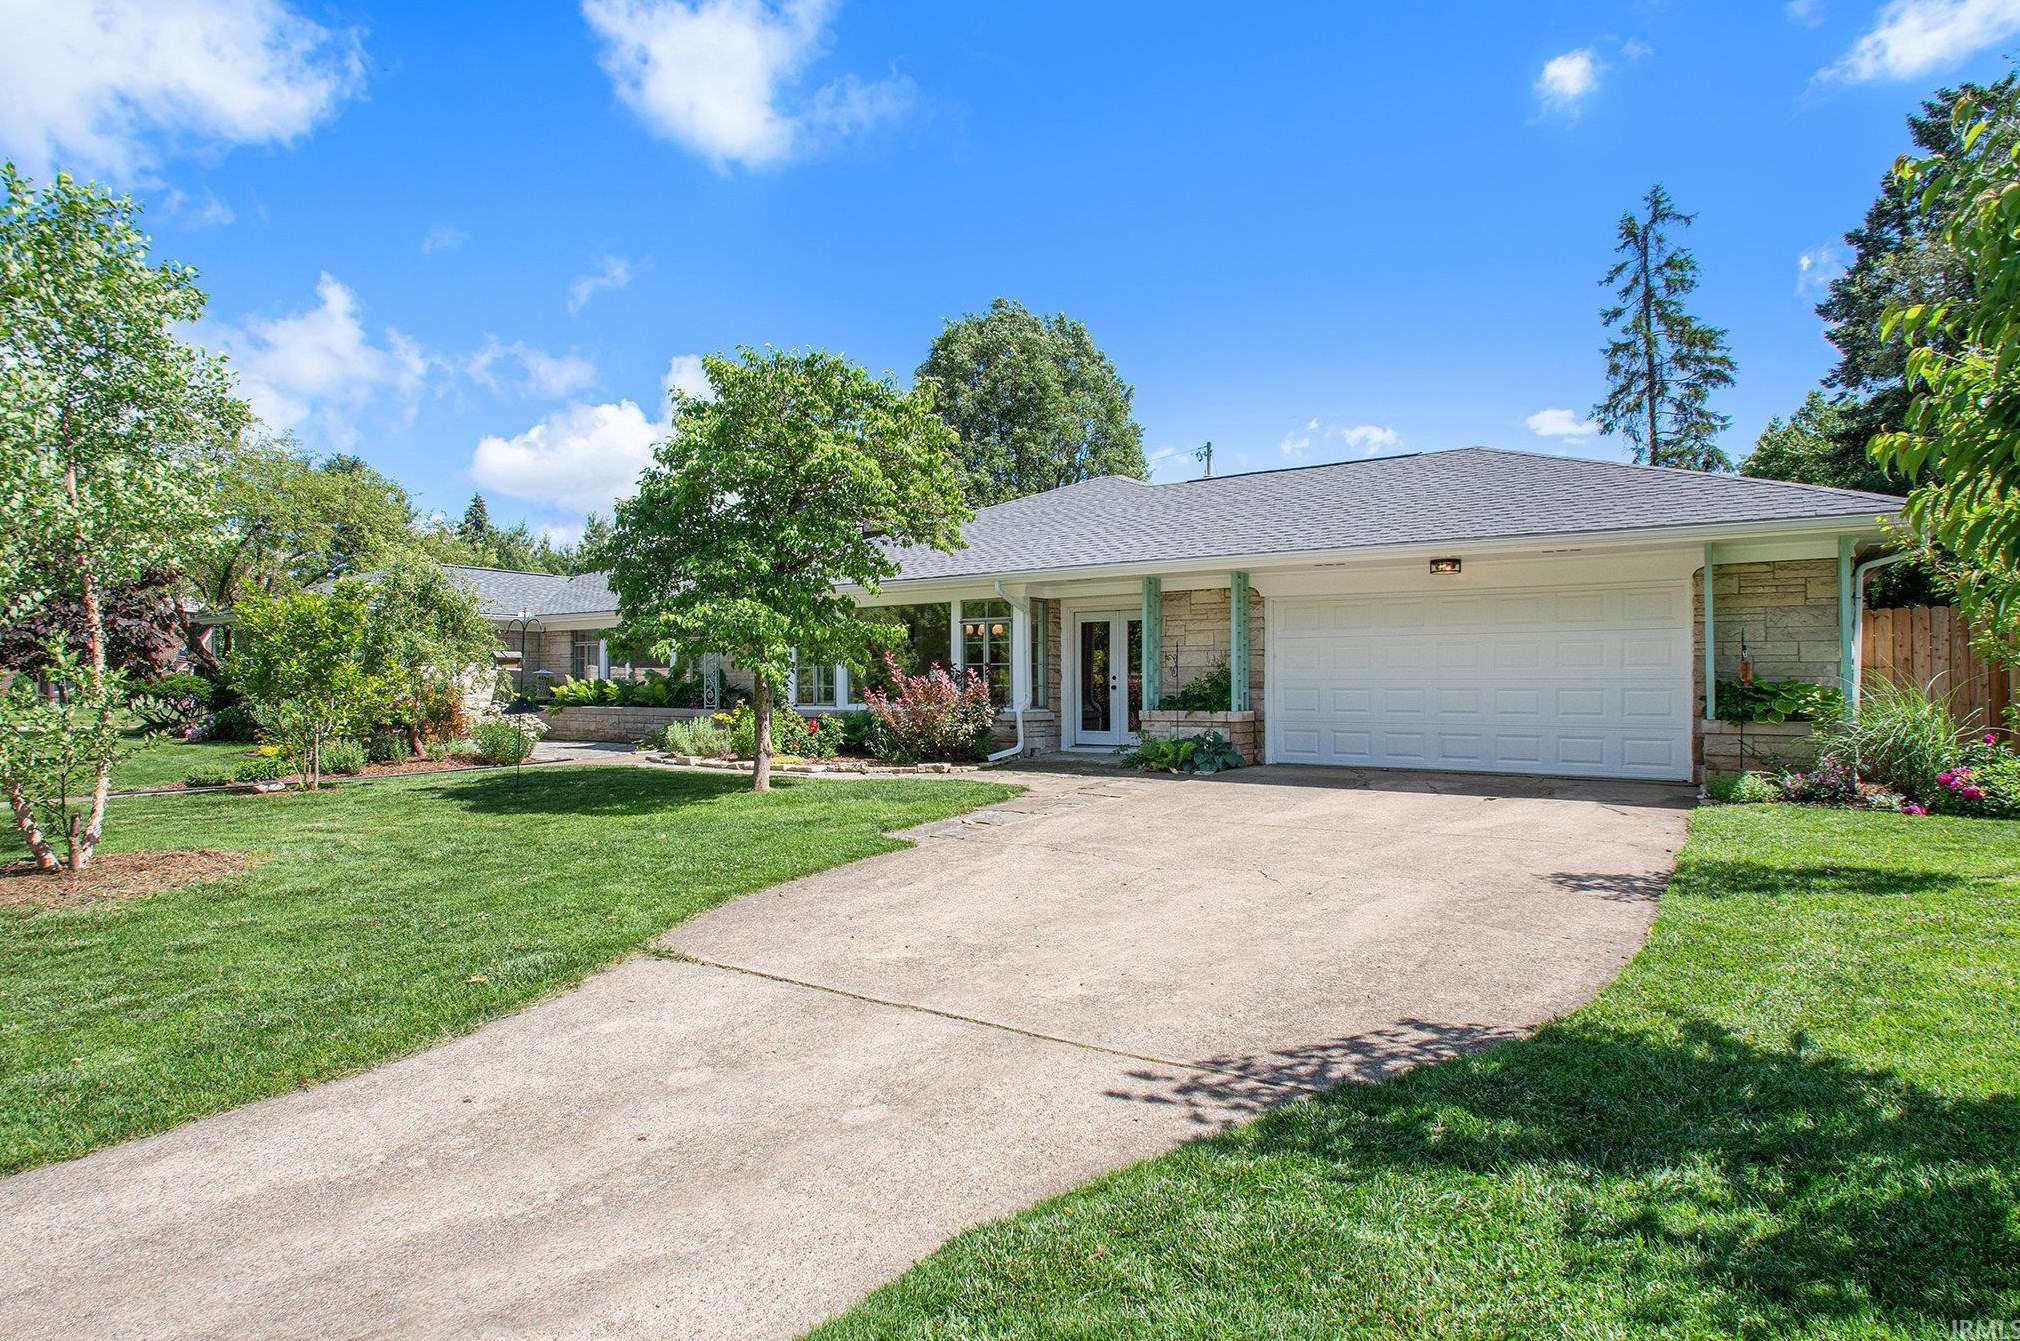 1914 Bader Ave, South Bend, IN 46617